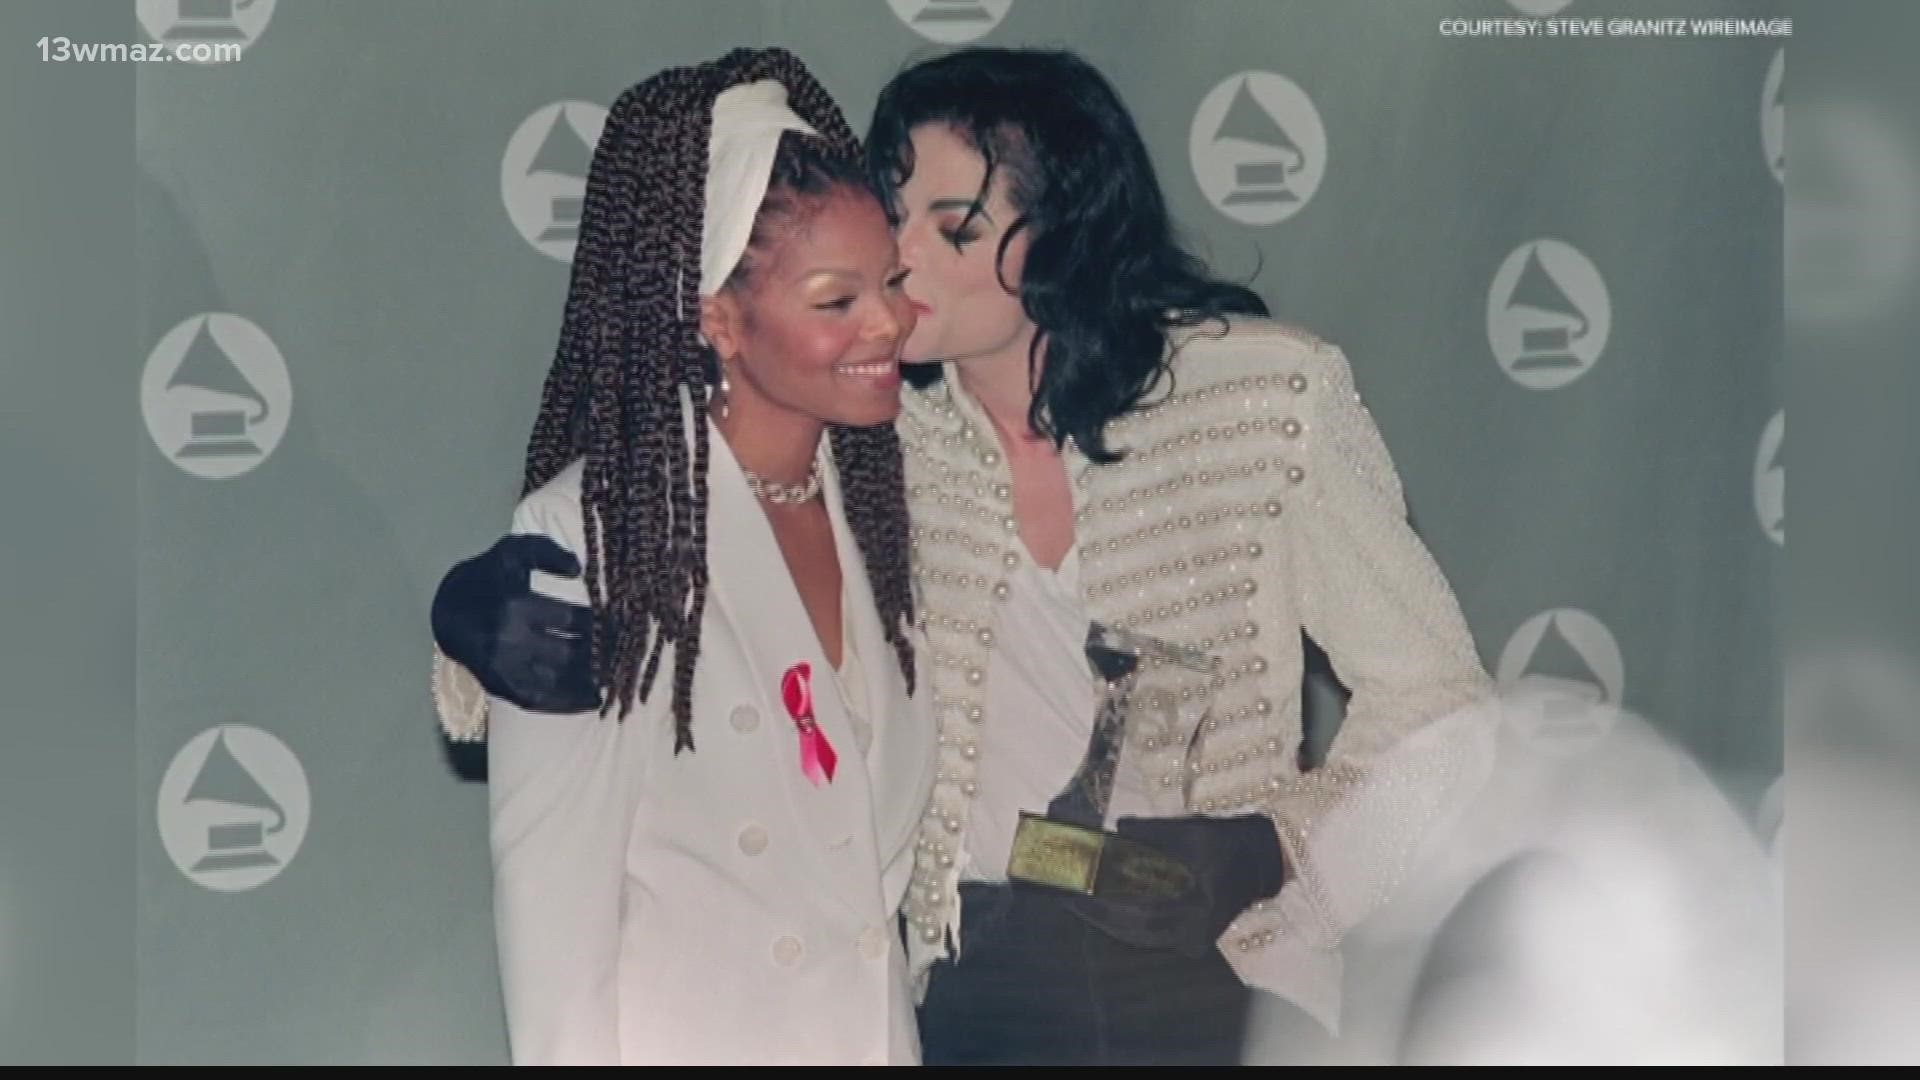 This Friday there's a tribute show honoring the iconic Michael and Janet Jackson at Macon's  Douglass Theatre in Macon.